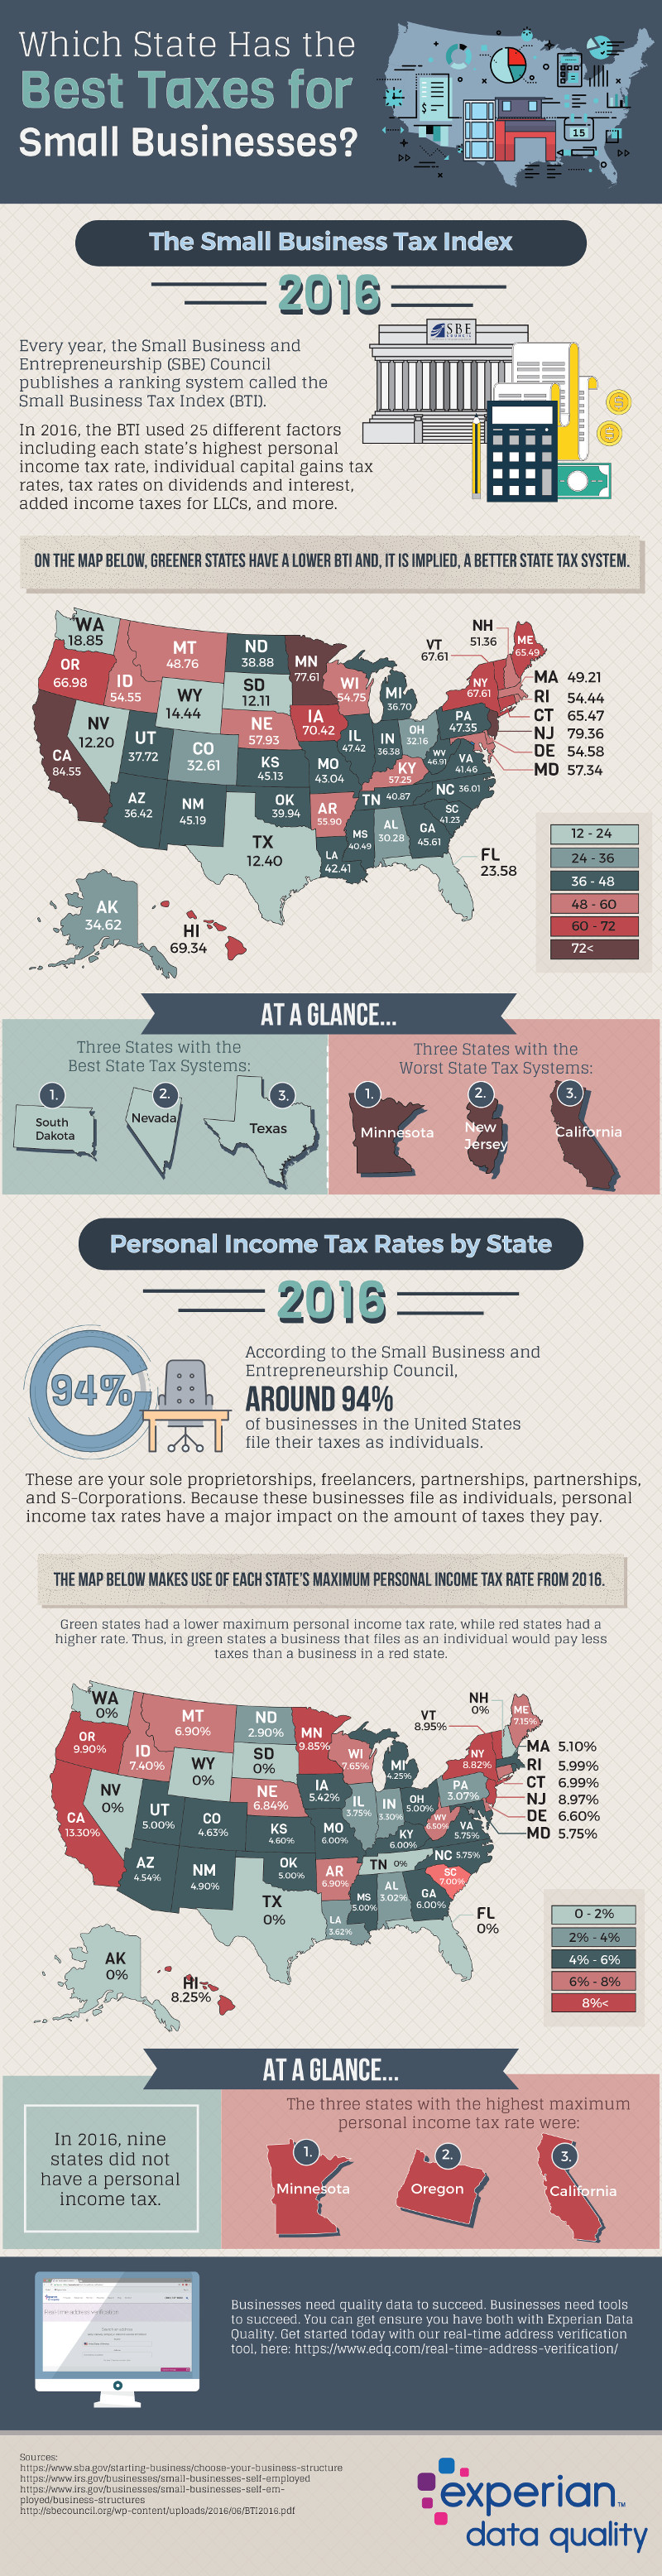 Which State Has the Best Taxes for Small Businesses?